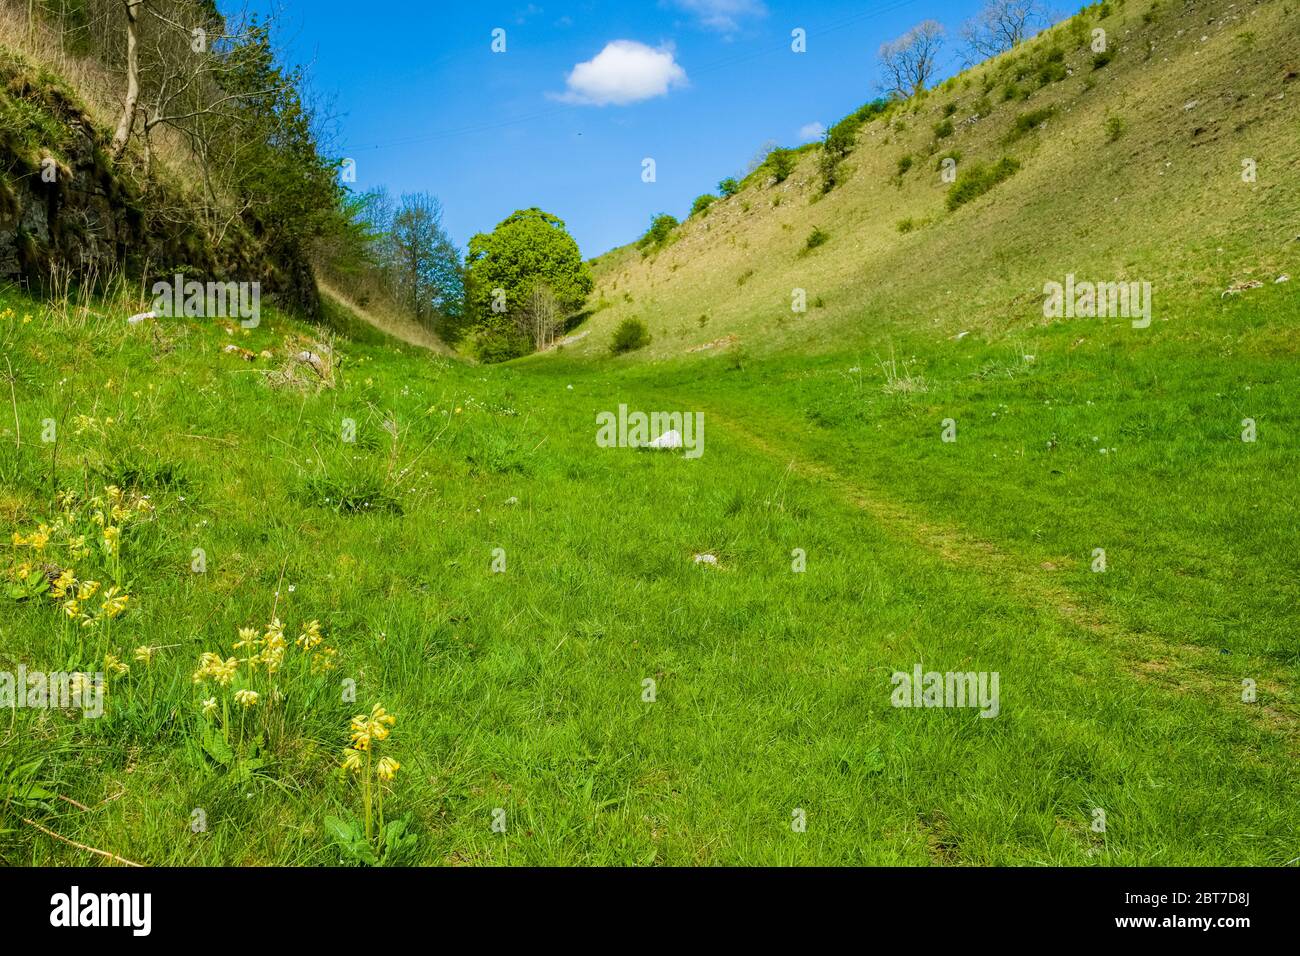 Woo Dale in the parish of Green Fairfield near Buxton, Derbyshire,UK. Peak District National Park Stock Photo